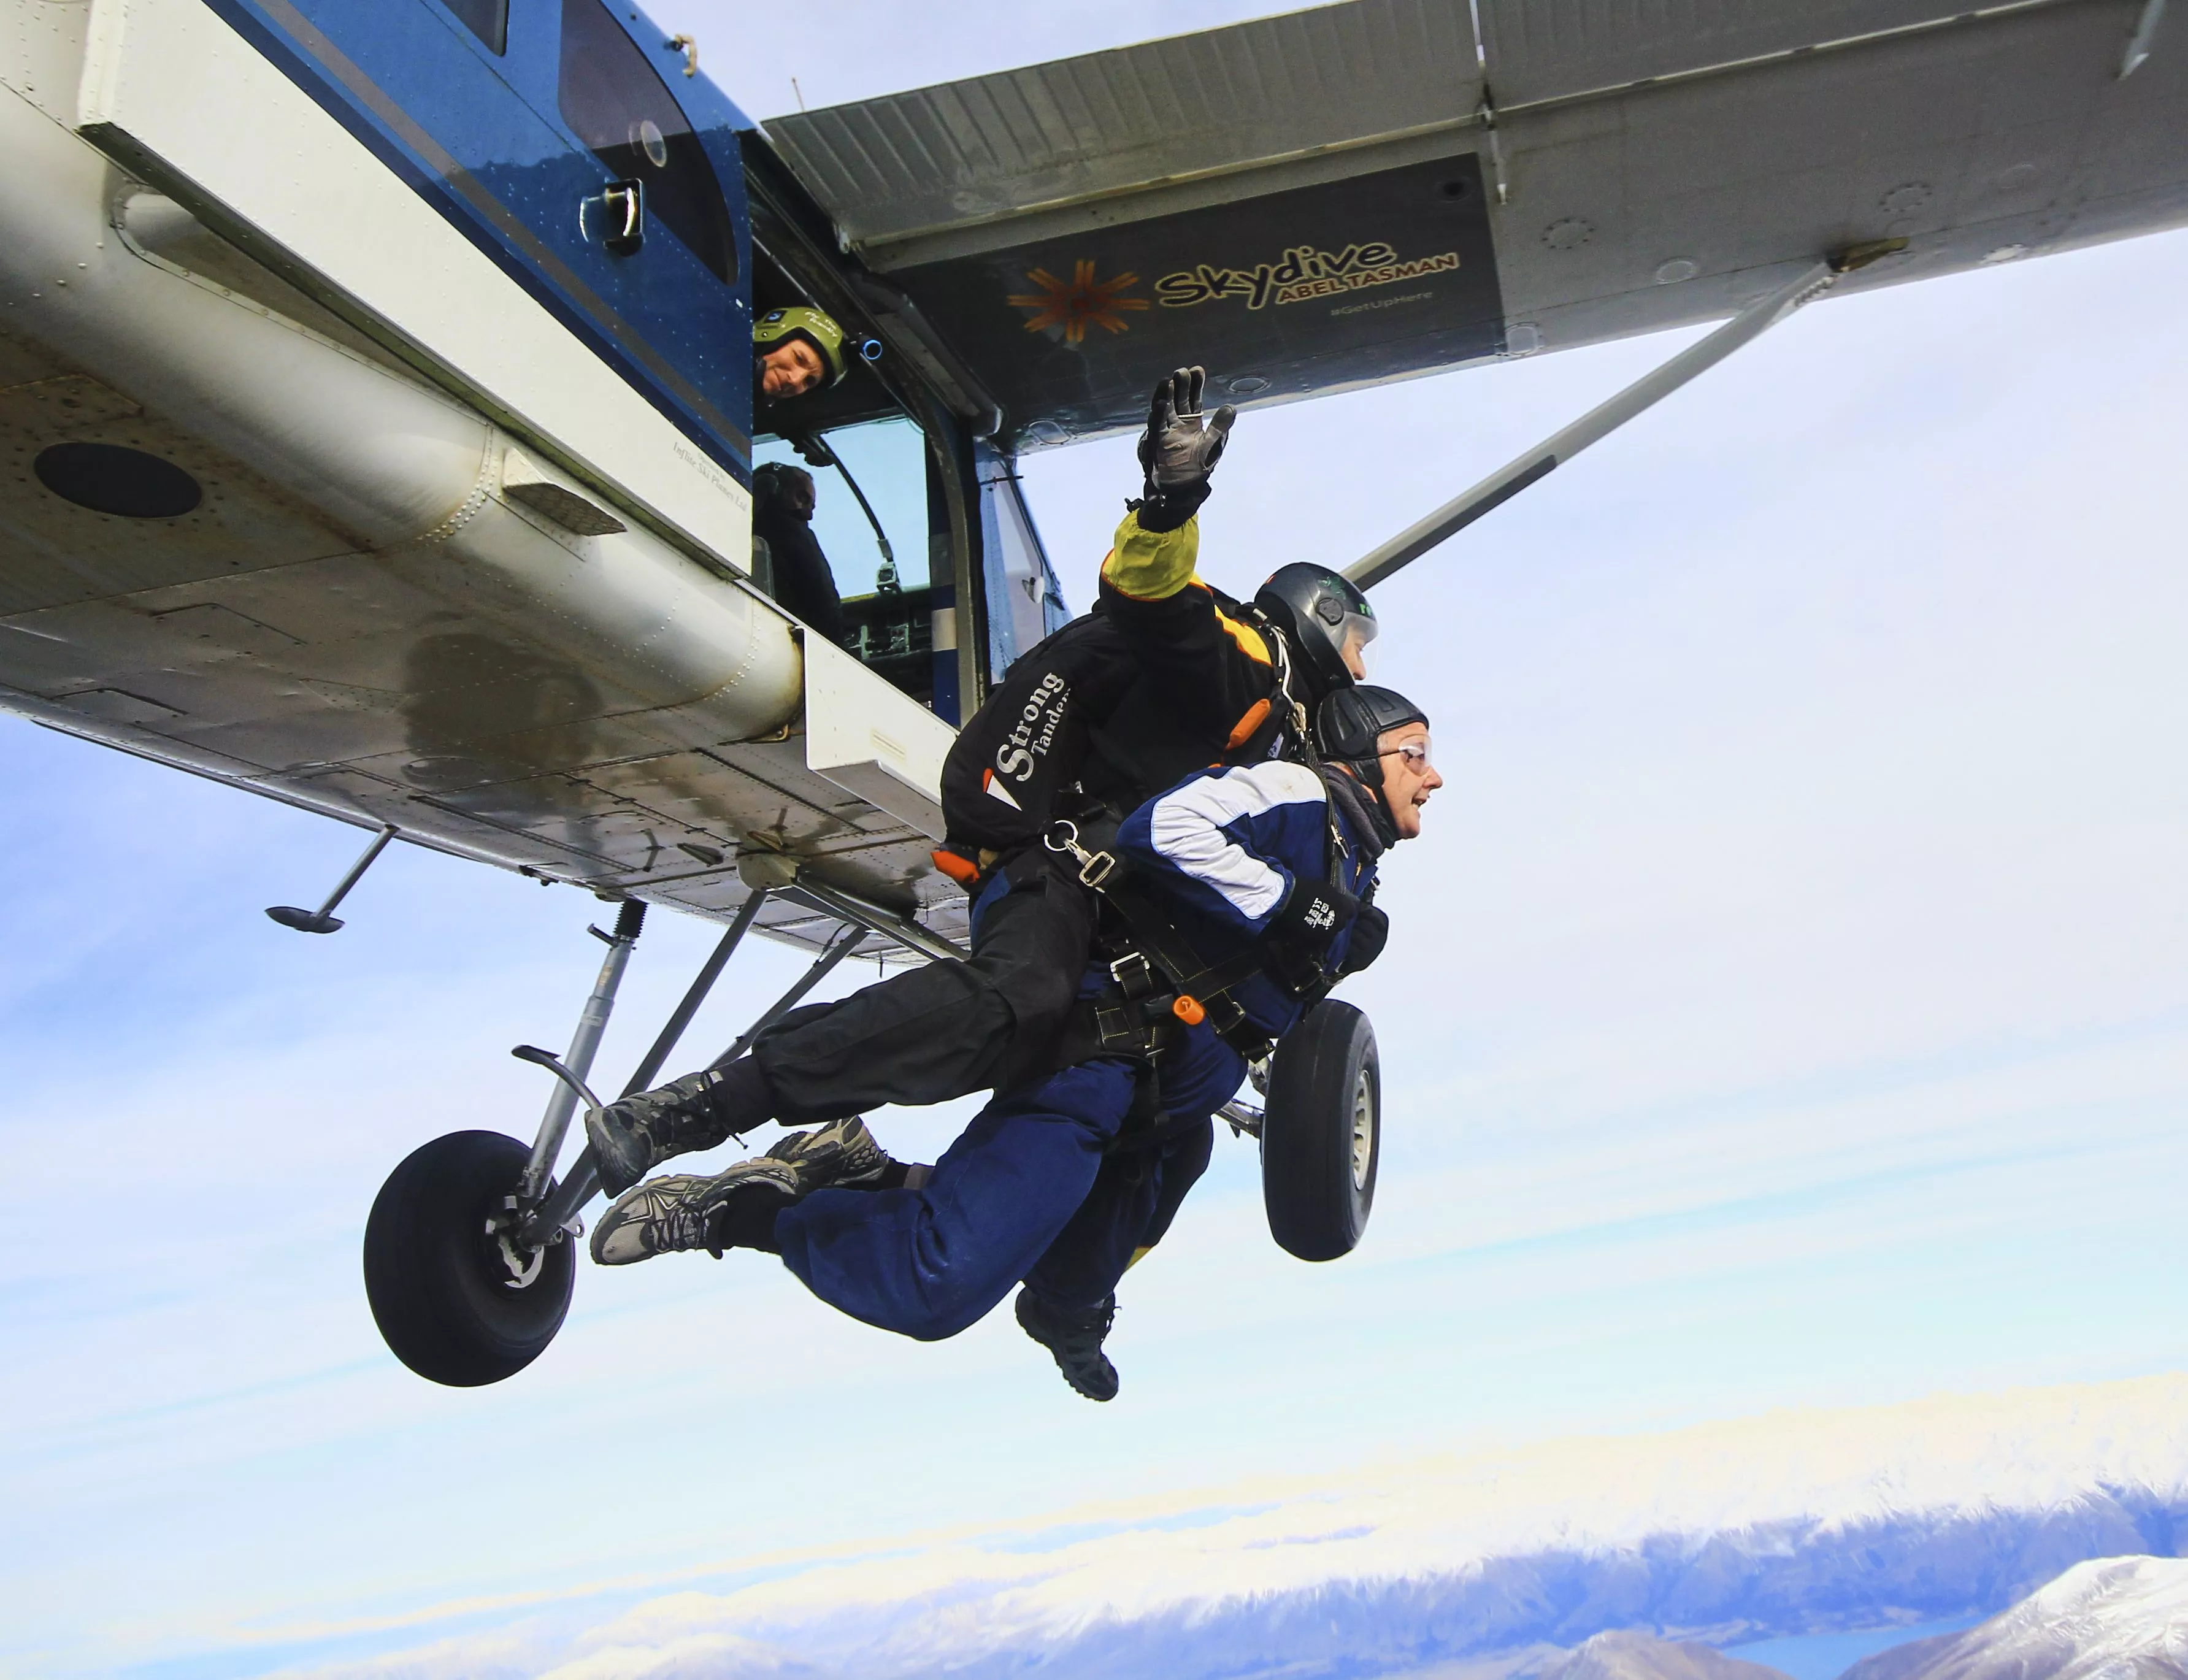 Skydive Mt.Cook in New Zealand, Australia and Oceania | Skydiving - Rated 0.9